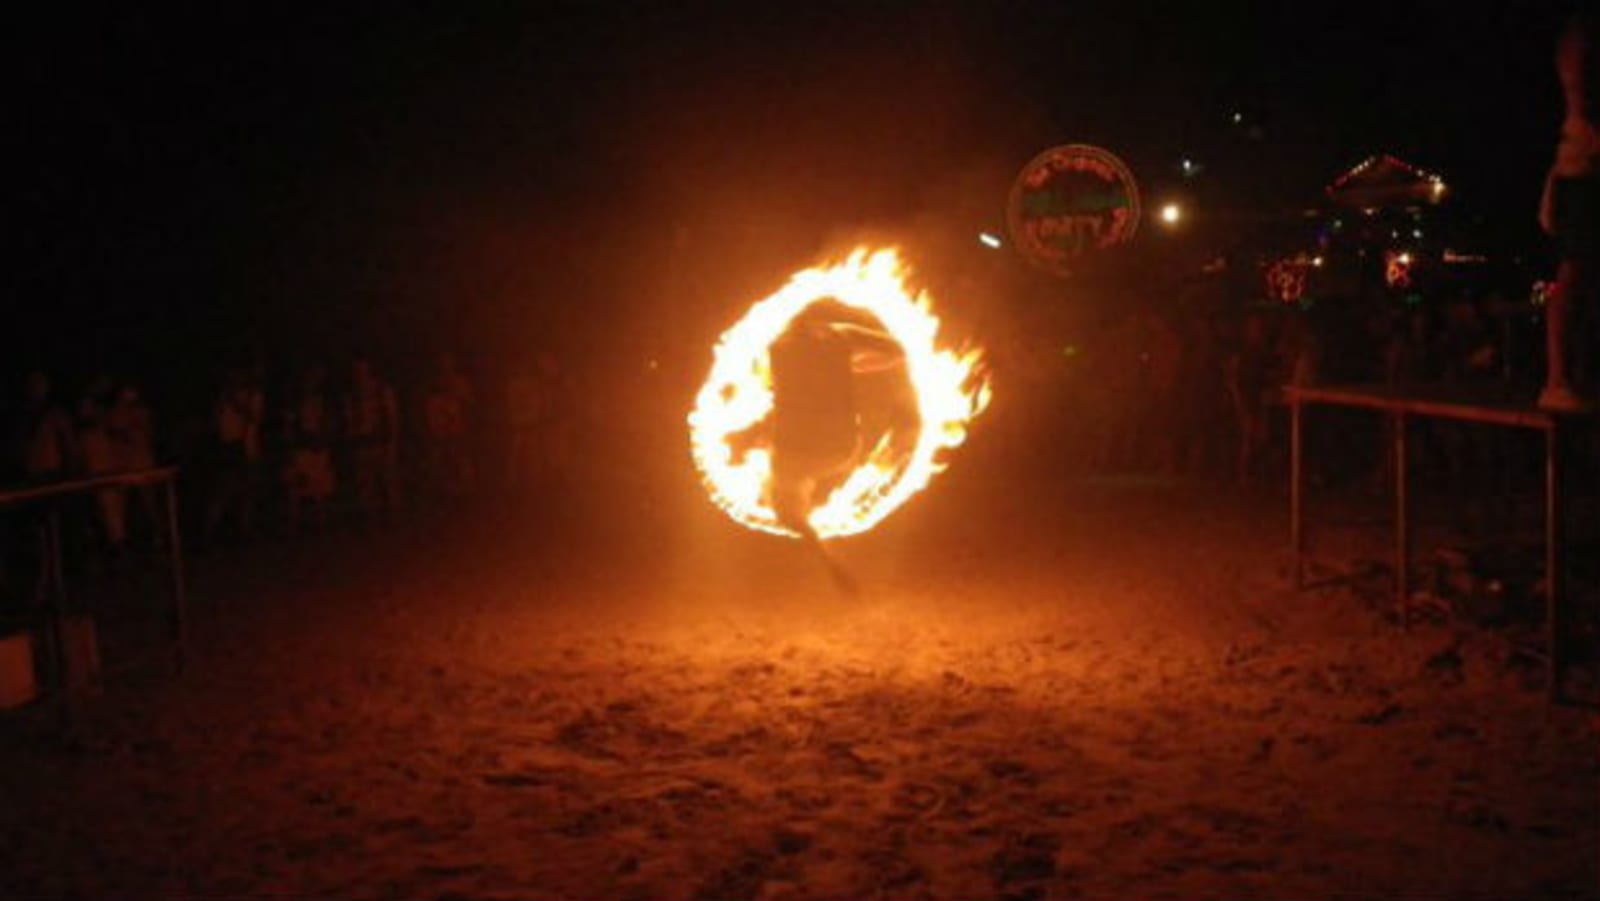 Ring of fire being jumped through at nighttime